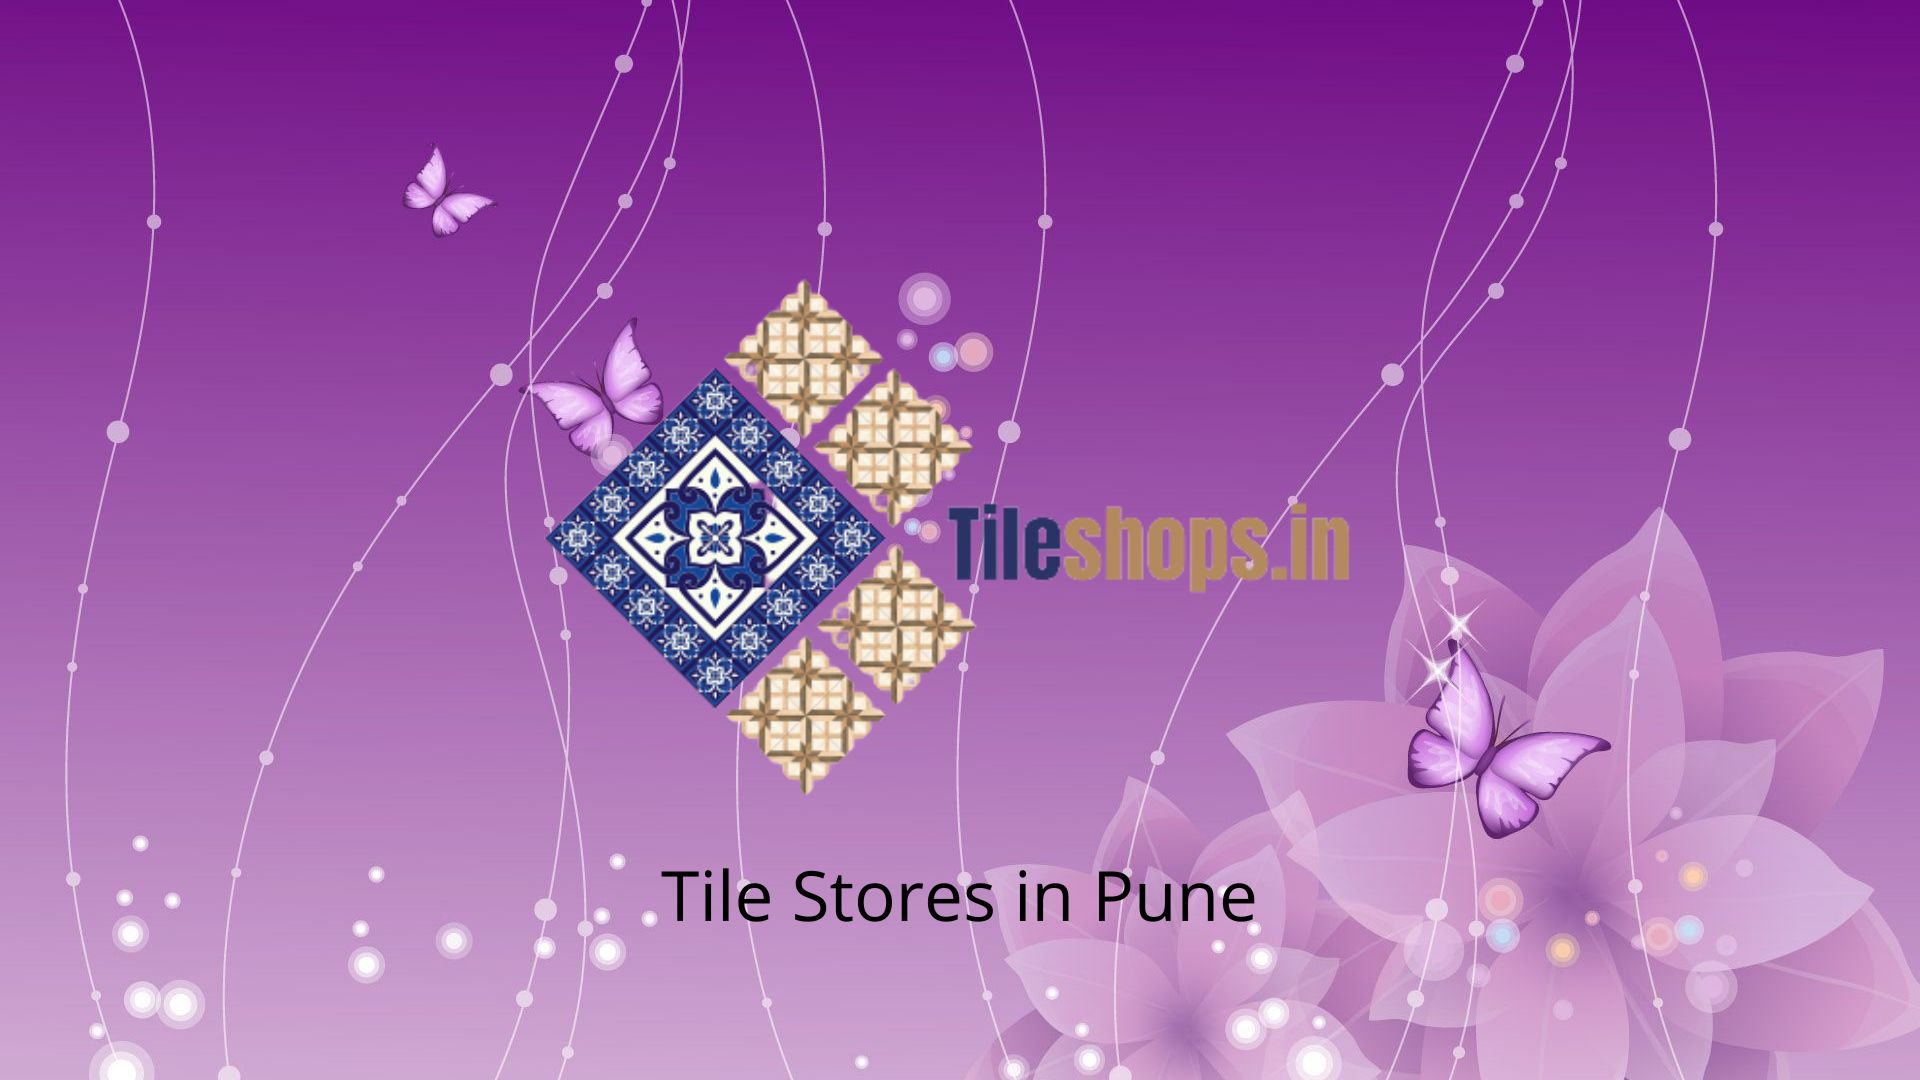 Tile Stores in Pune